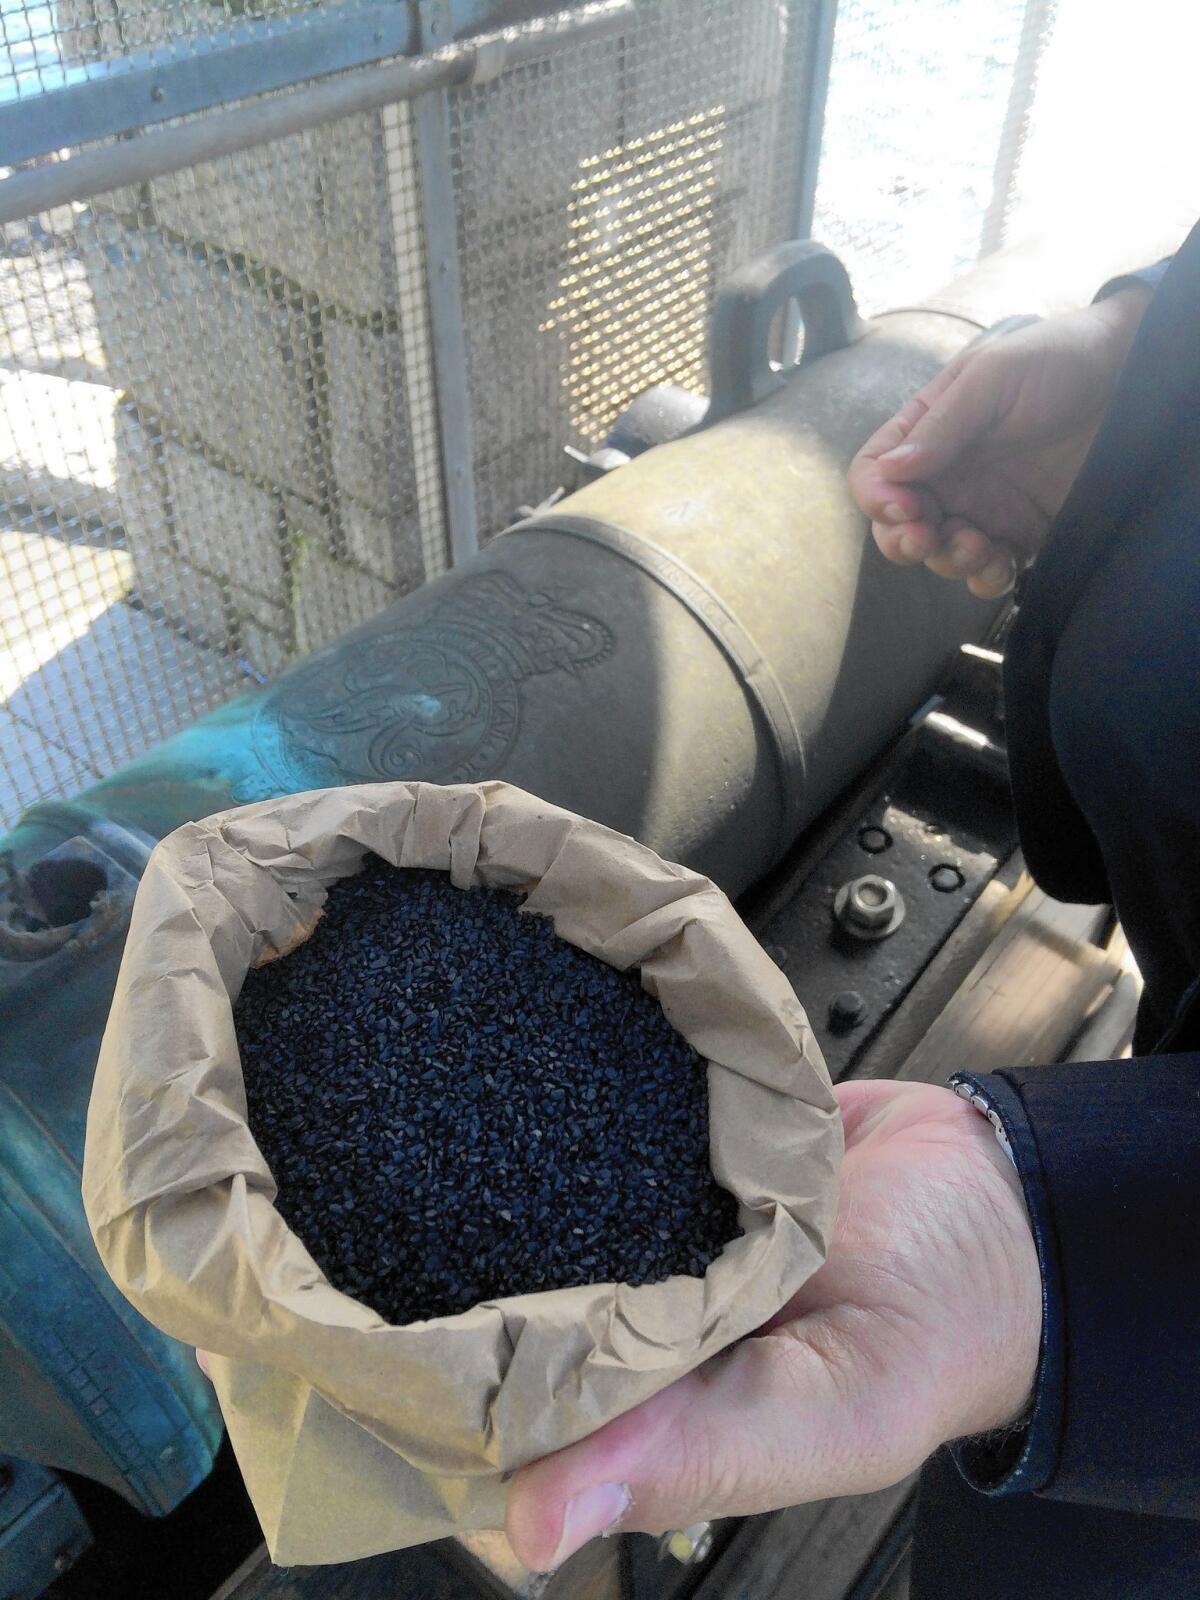 The Vancouver cannon firing calls for a paper sack containing a pound and a half of gunpowder, which is placed in the cannon barrel and lighted with an electronic match connected to a timer.